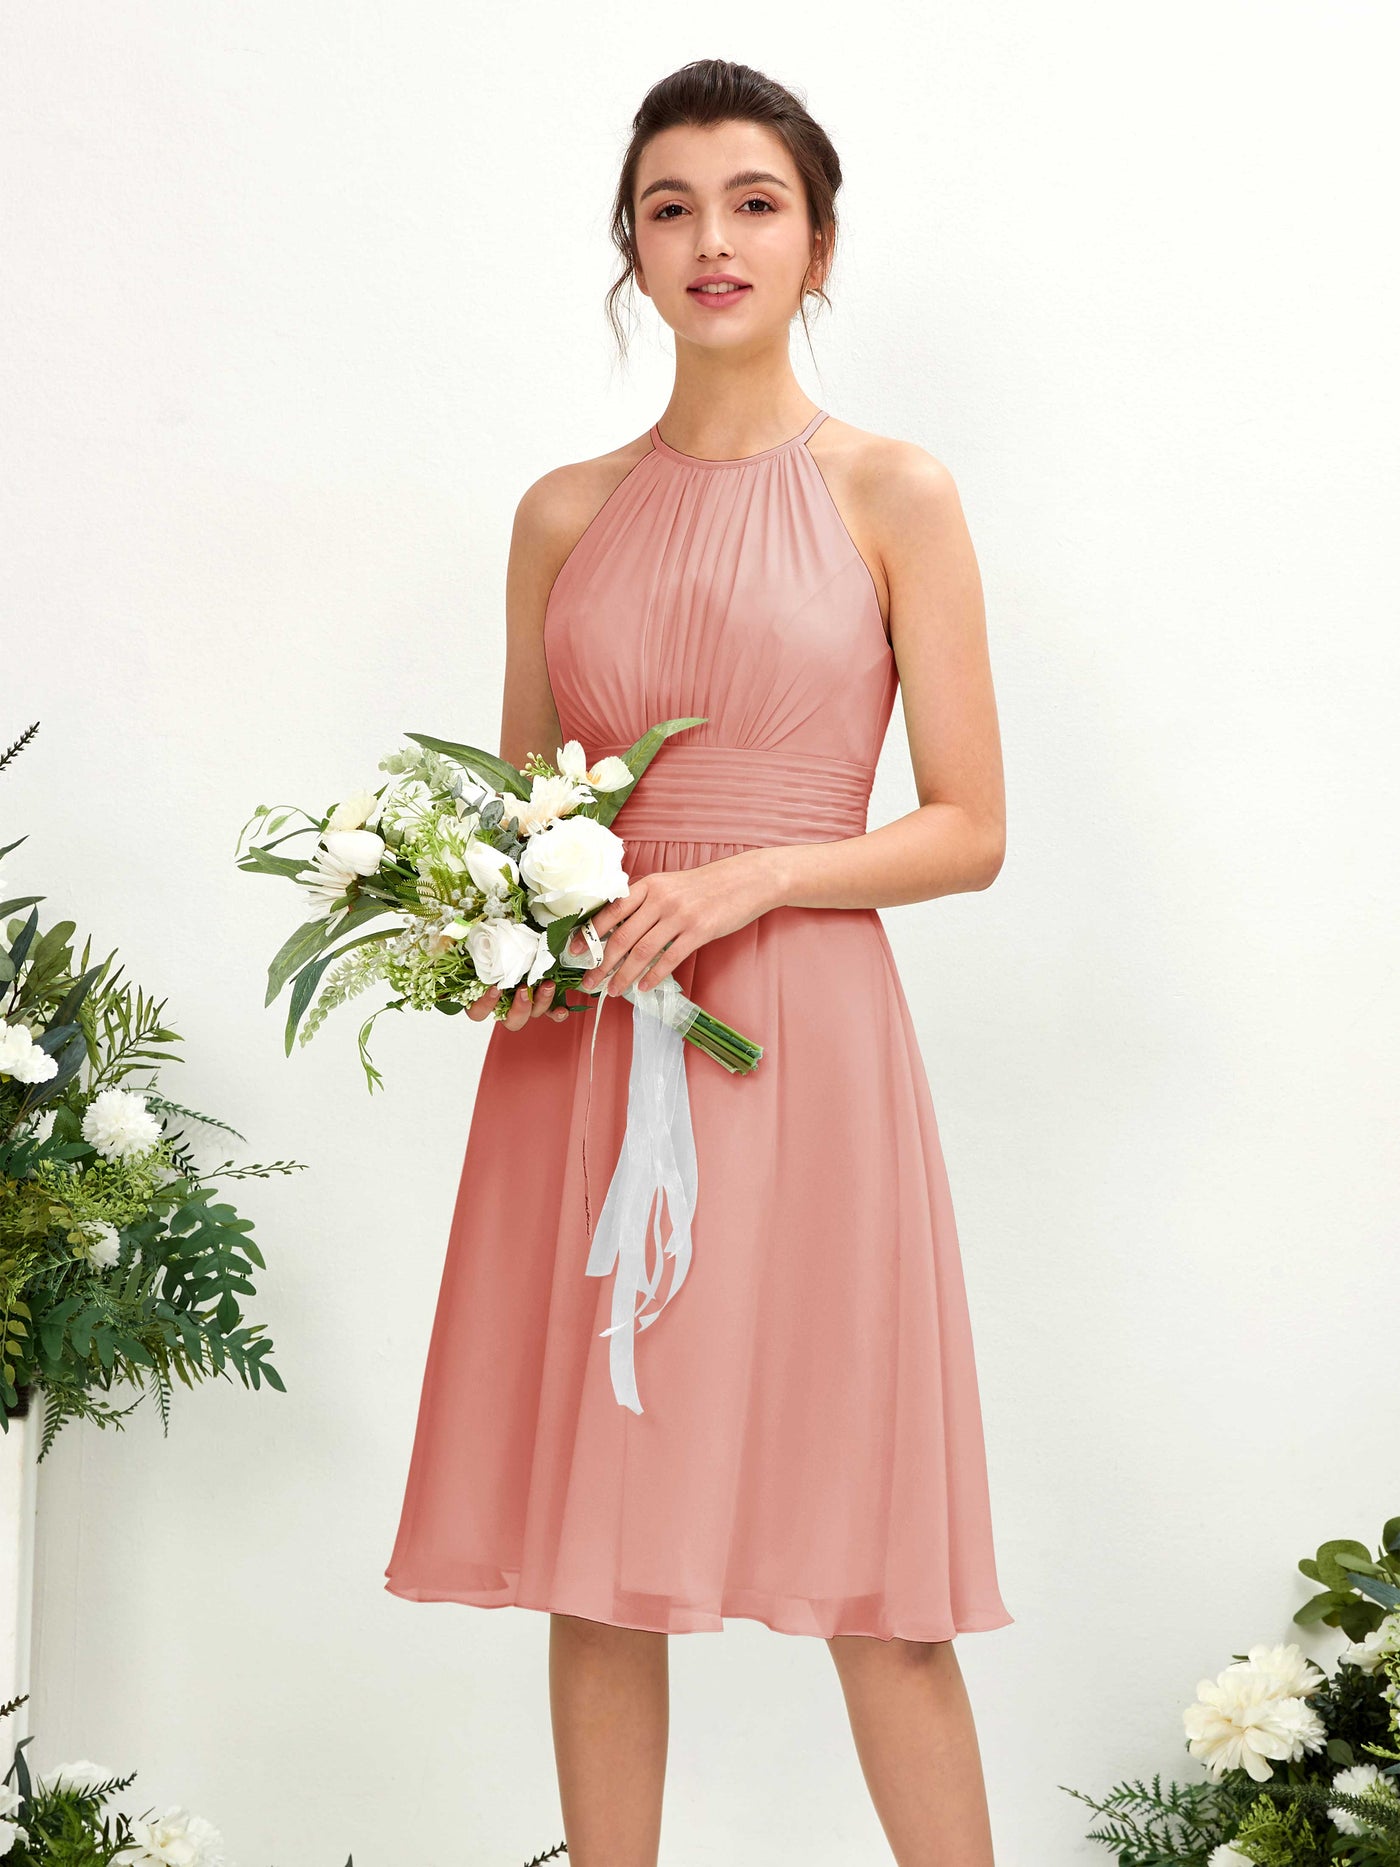 Champagne Rose Bridesmaid Dresses Bridesmaid Dress A-line Chiffon Halter Knee Length Sleeveless Wedding Party Dress (81220106)#color_champagne-rose